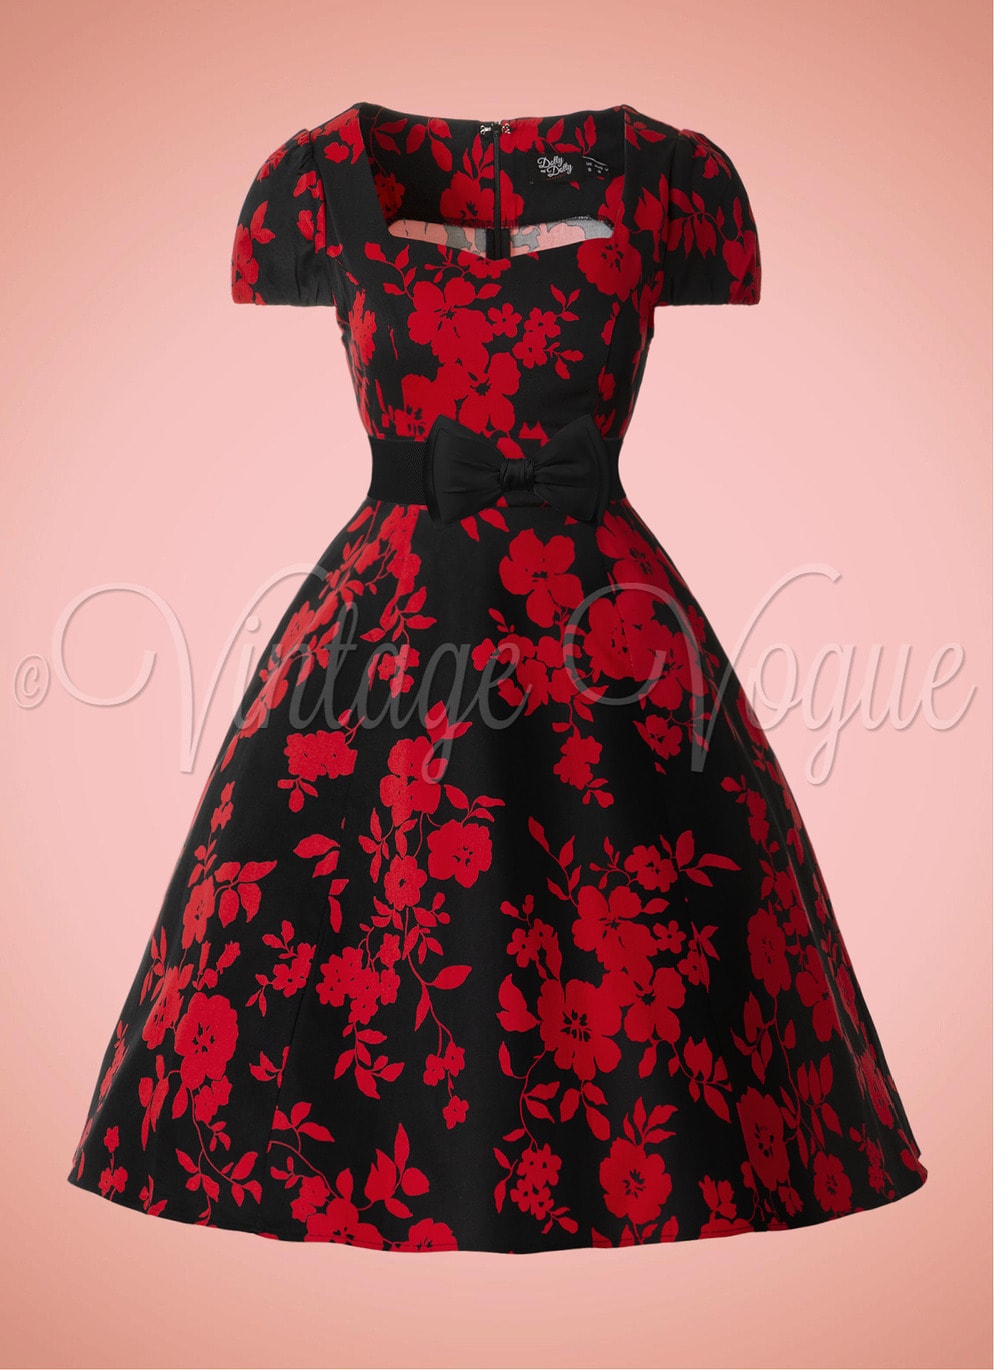 Dolly and Dotty 50's Retro Rockabilly Swing Kleid Claudia Floral in Schwarz Rot 50er Jahre Petticoat Jive Lindy Hop Damen Kleid